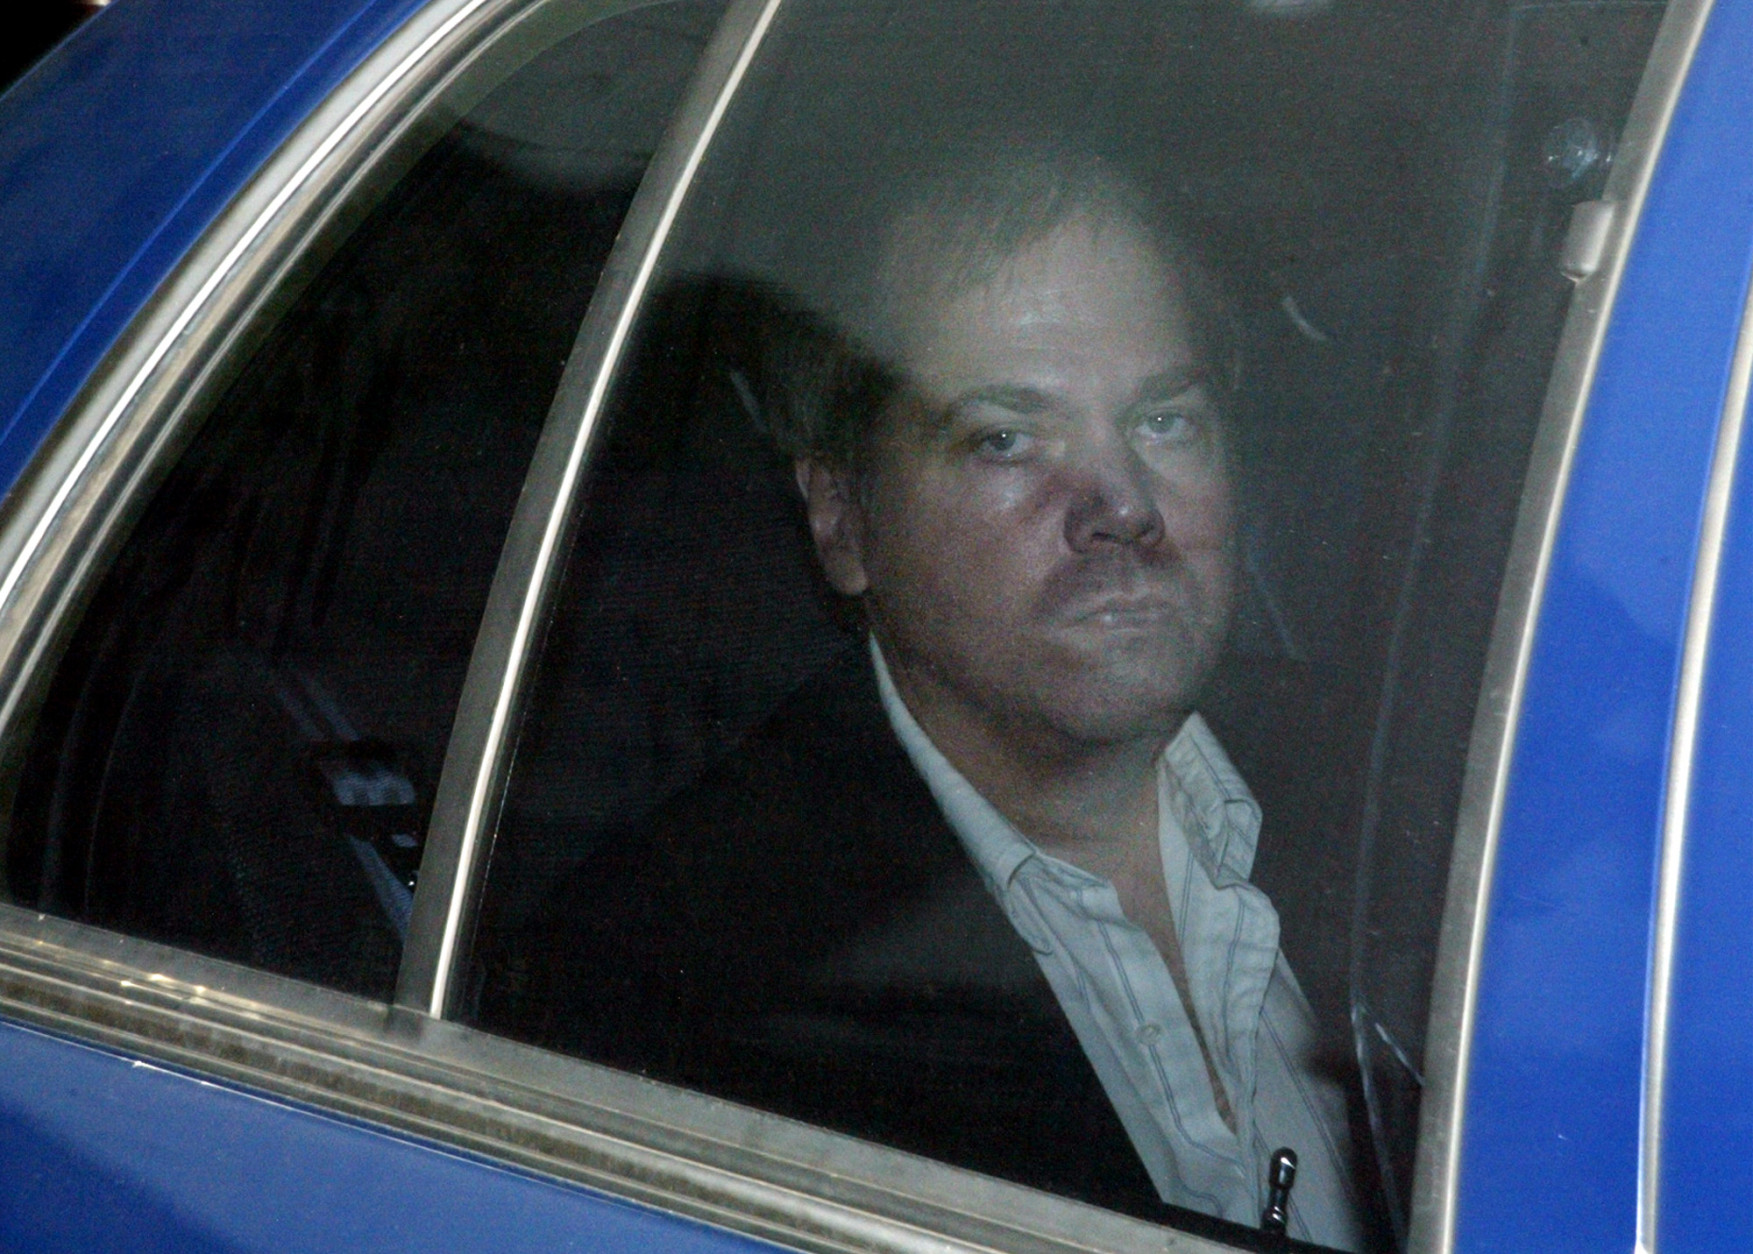 FILE - In this Nov. 19, 2003 file photo, John Hinckley Jr. arrives at the U.S. District Court House in Washington. Hinckley, who shot President Ronald Reagan in 1981, has behaved well over the past year when he's been freed from a Washington mental hospital to visit his mother in Virginia, according to U.S. Secret Service reports. Hinckley, 57, has been allowed to go to mother's home since 2006, and the length of his visits has increased over time. (AP Photo/Evan Vucci, File)